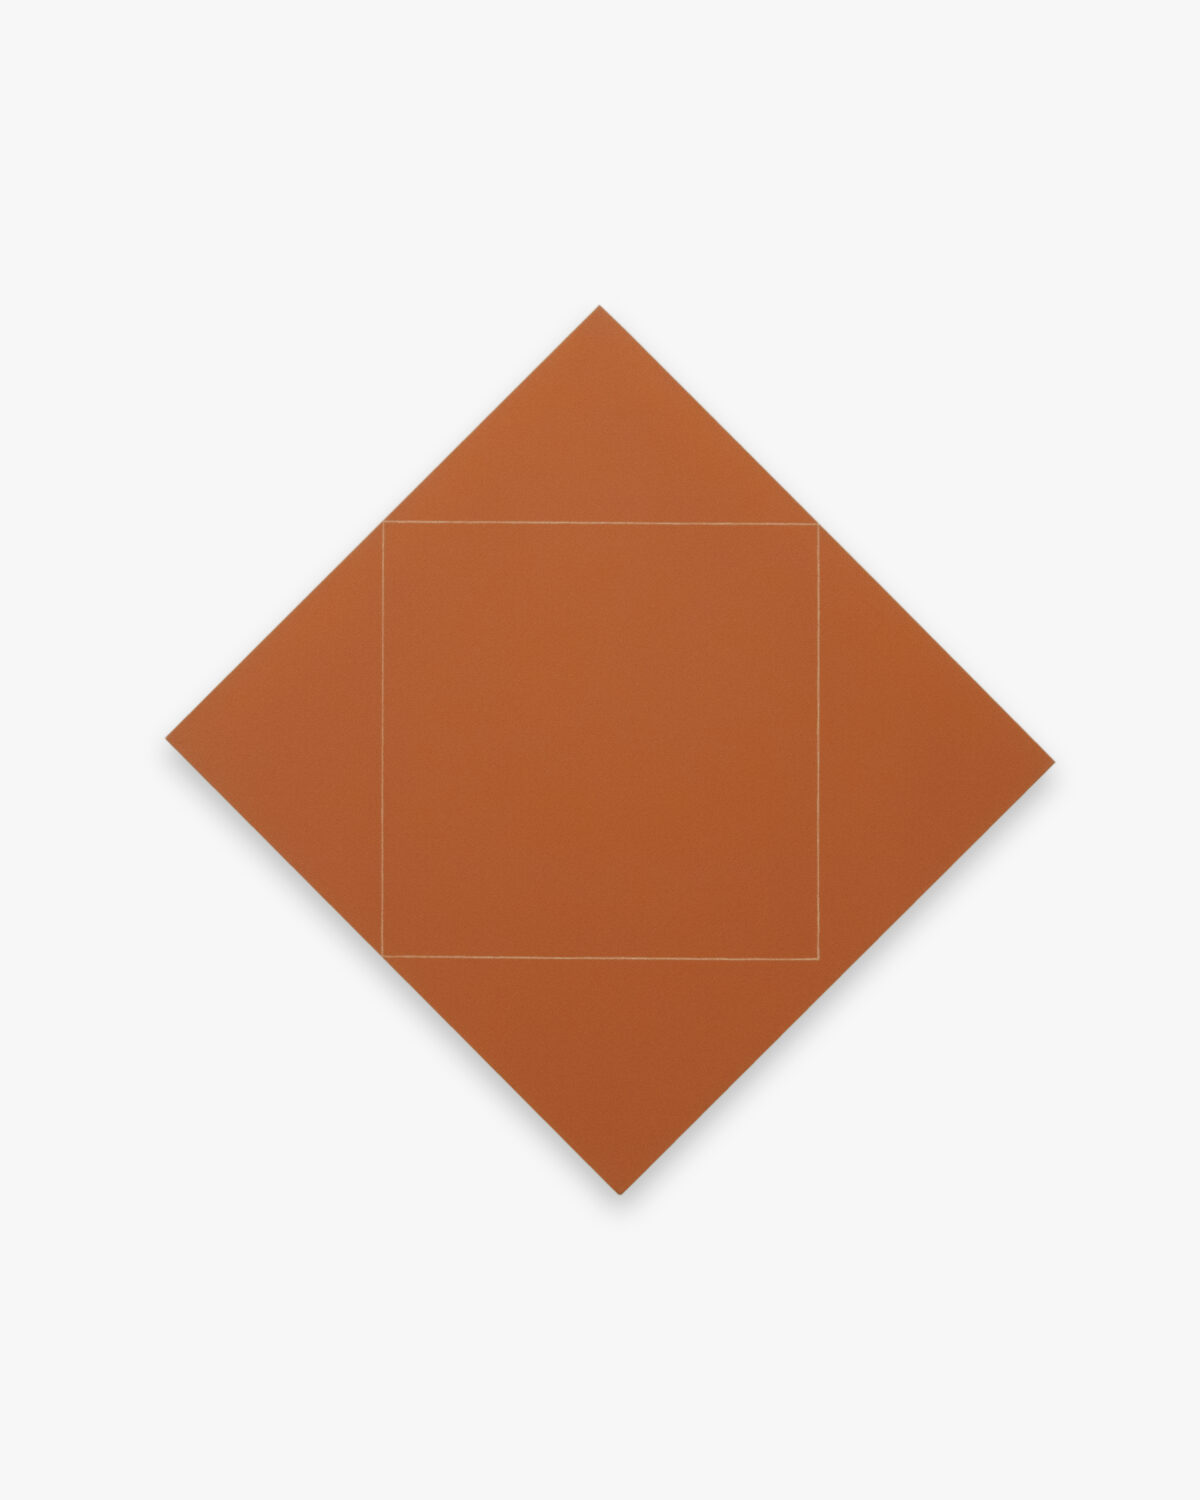 An orange rectangle with an outline of a square.